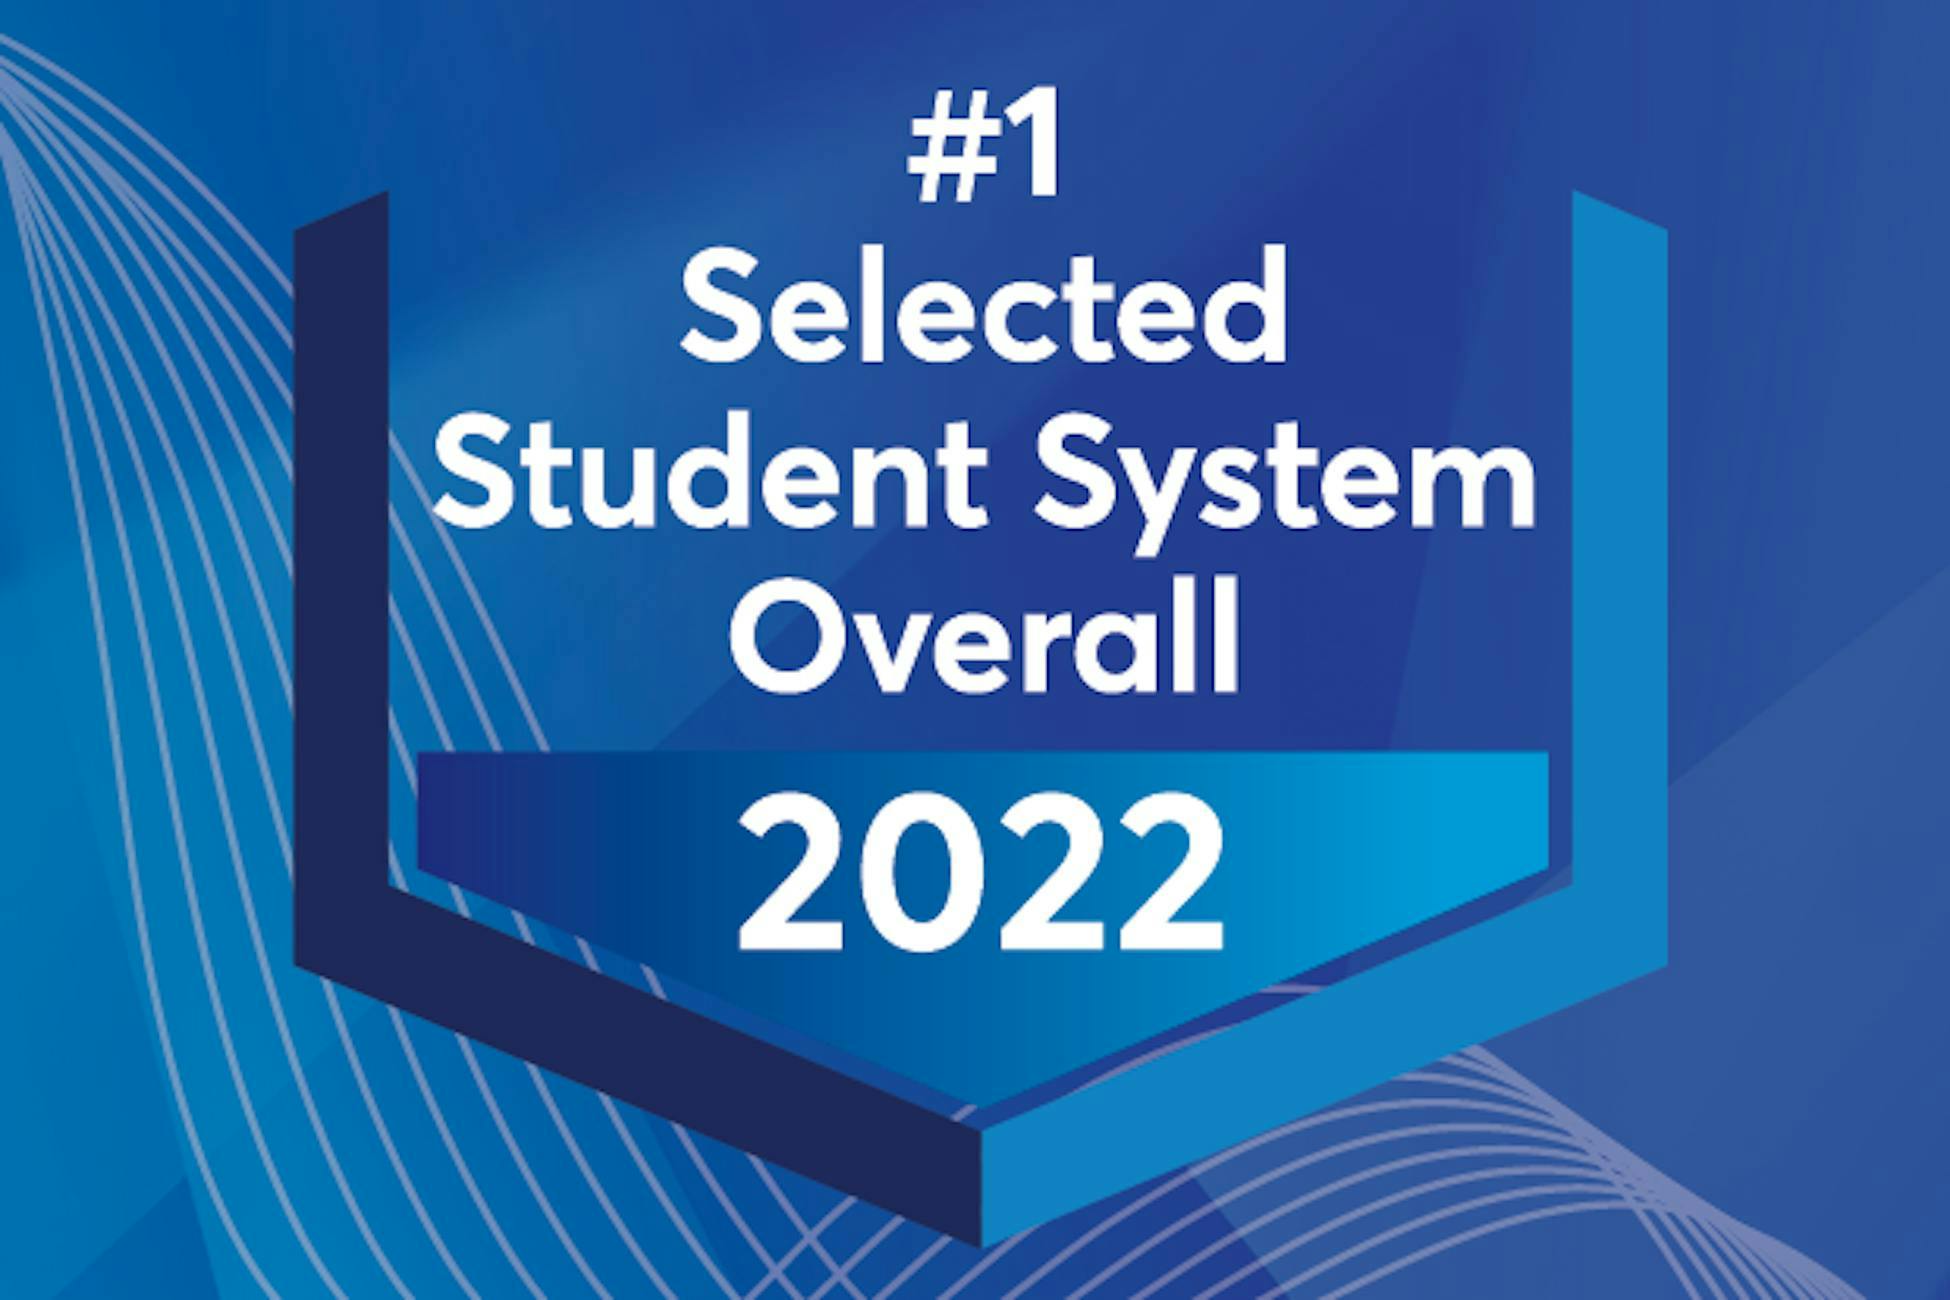 Tambellini Award #1 Selected Student System Overall in 2022